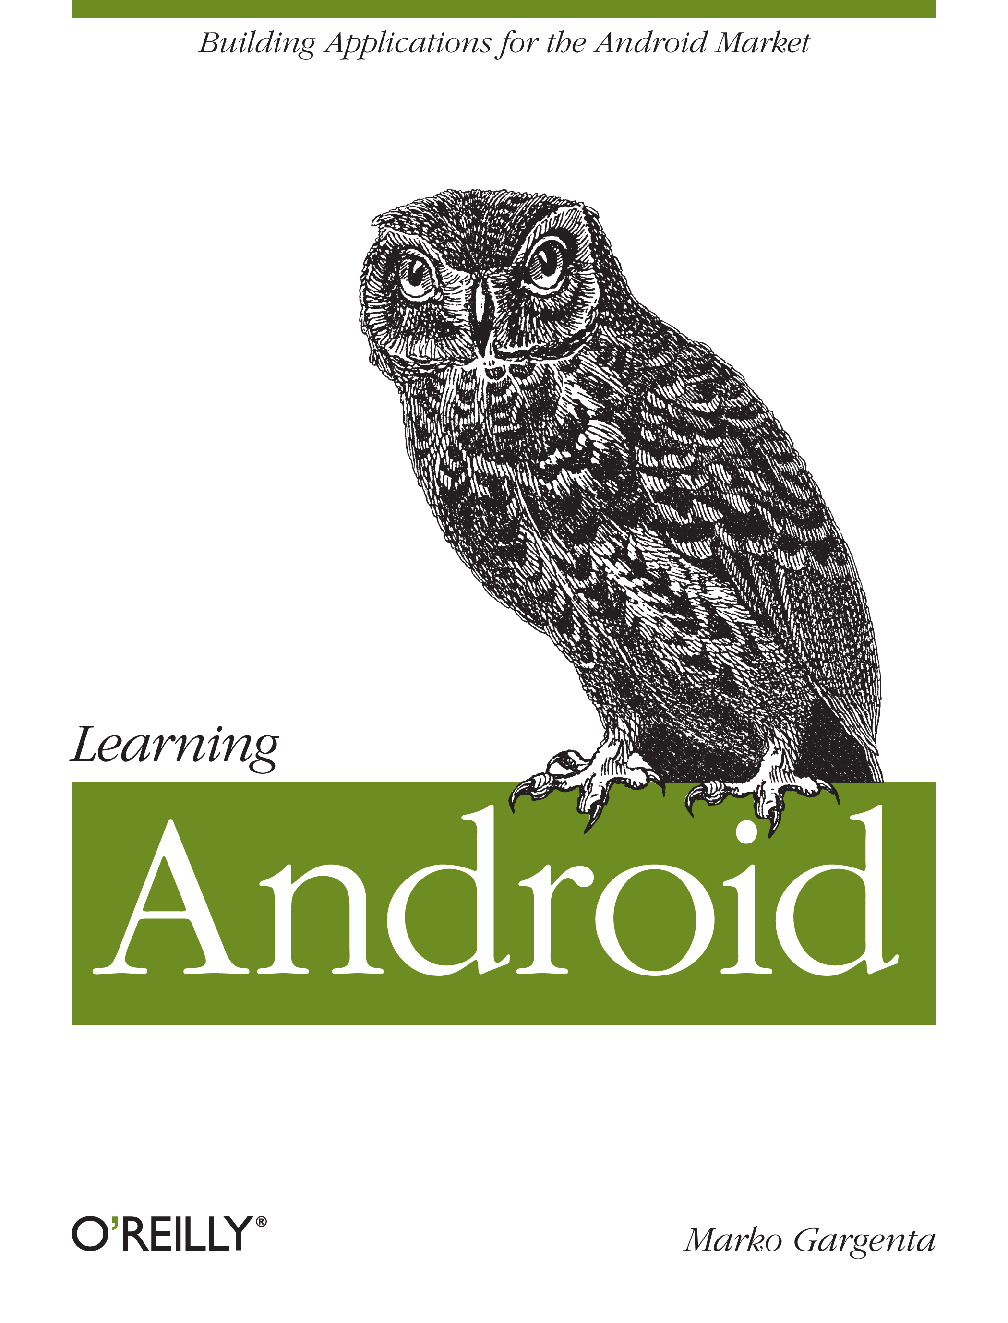 [android.开发书籍].OReilly.-.Learning.Android